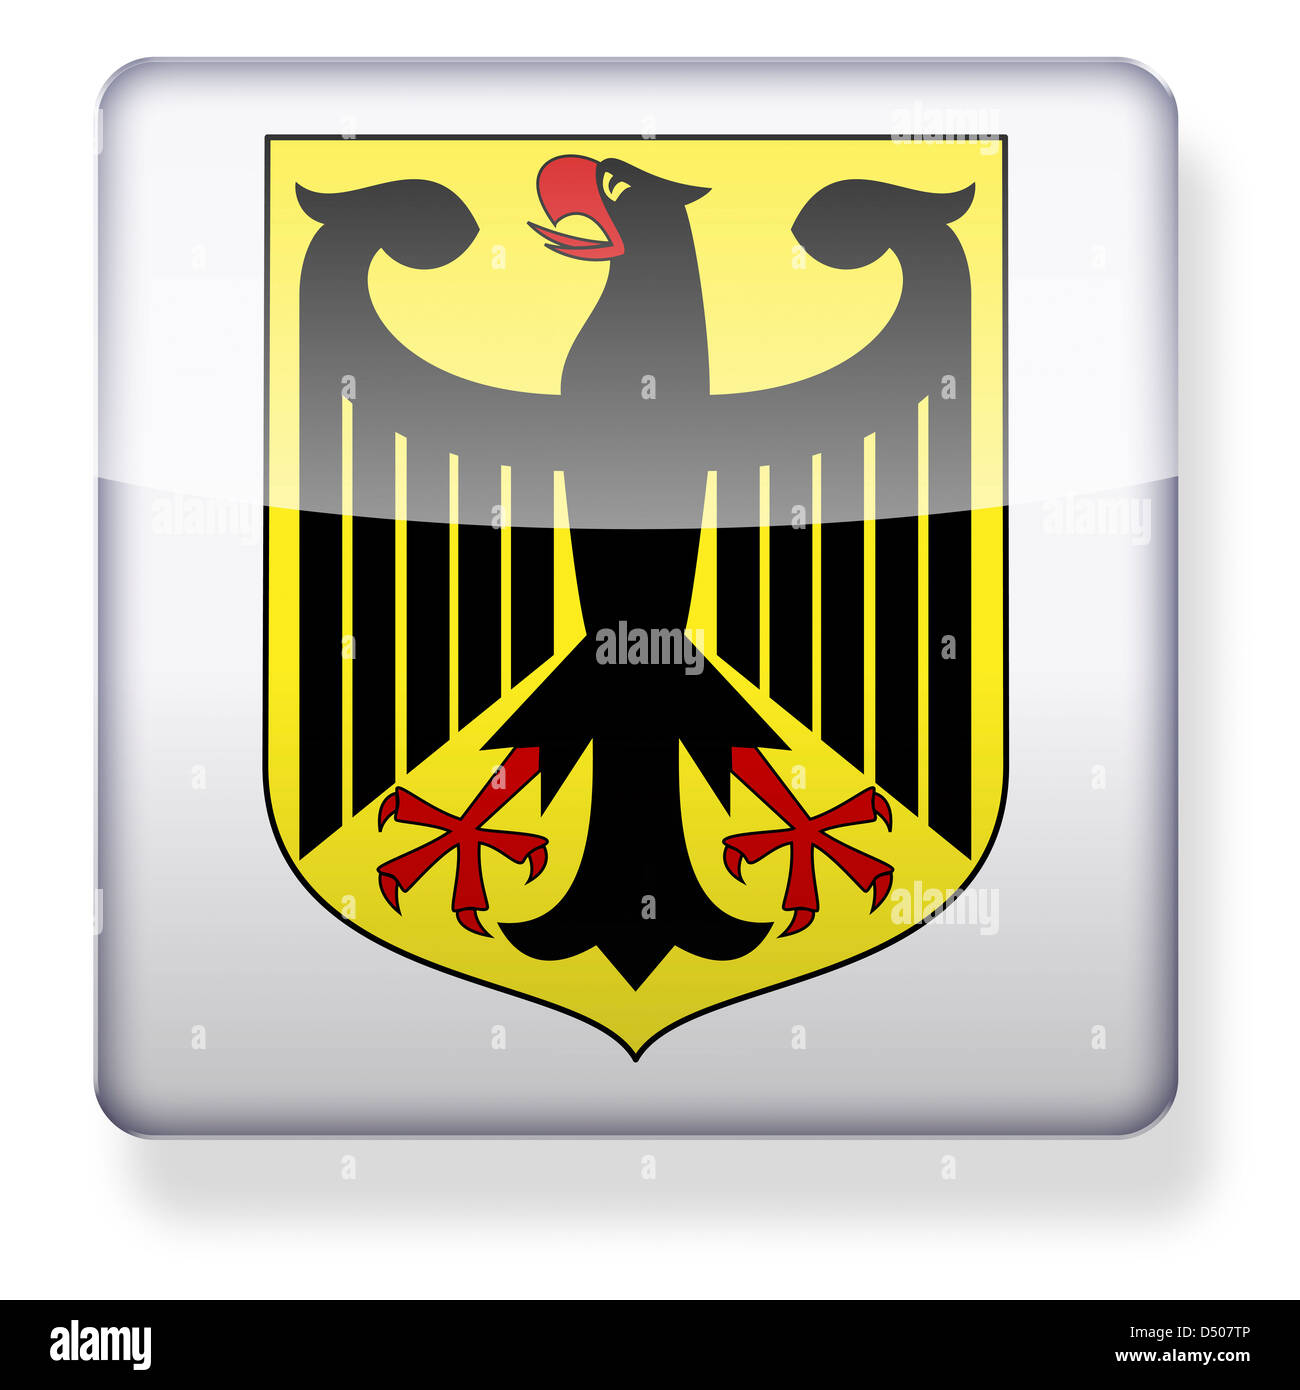 German eagle coat of arms as an app icon. Clipping path included. Stock Photo